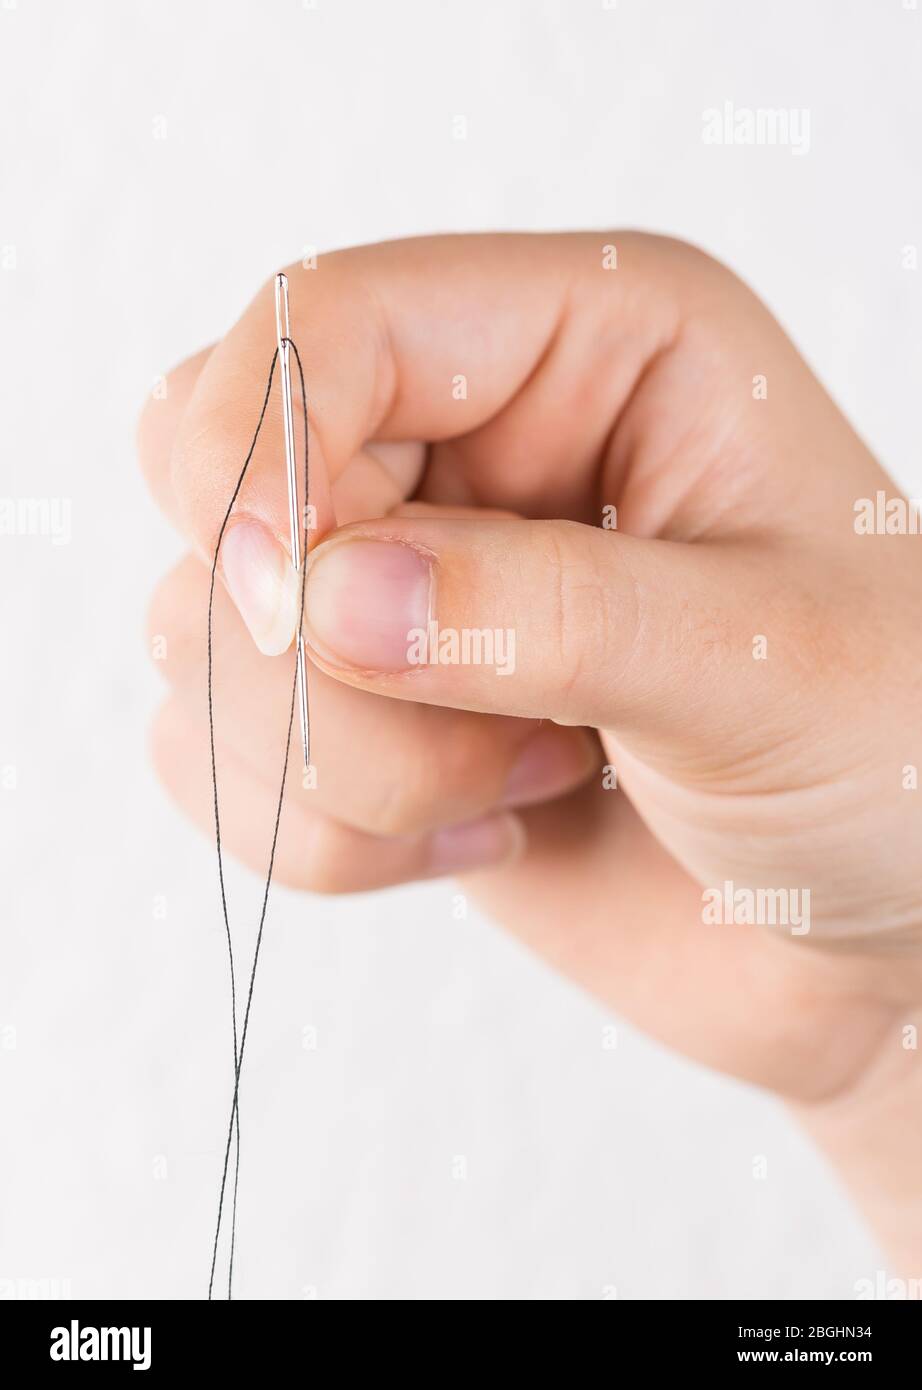 Fingers Holding a Needle with a Black Thread and a Coil on a Blue  Background Stock Image - Image of needle, linen: 120205223